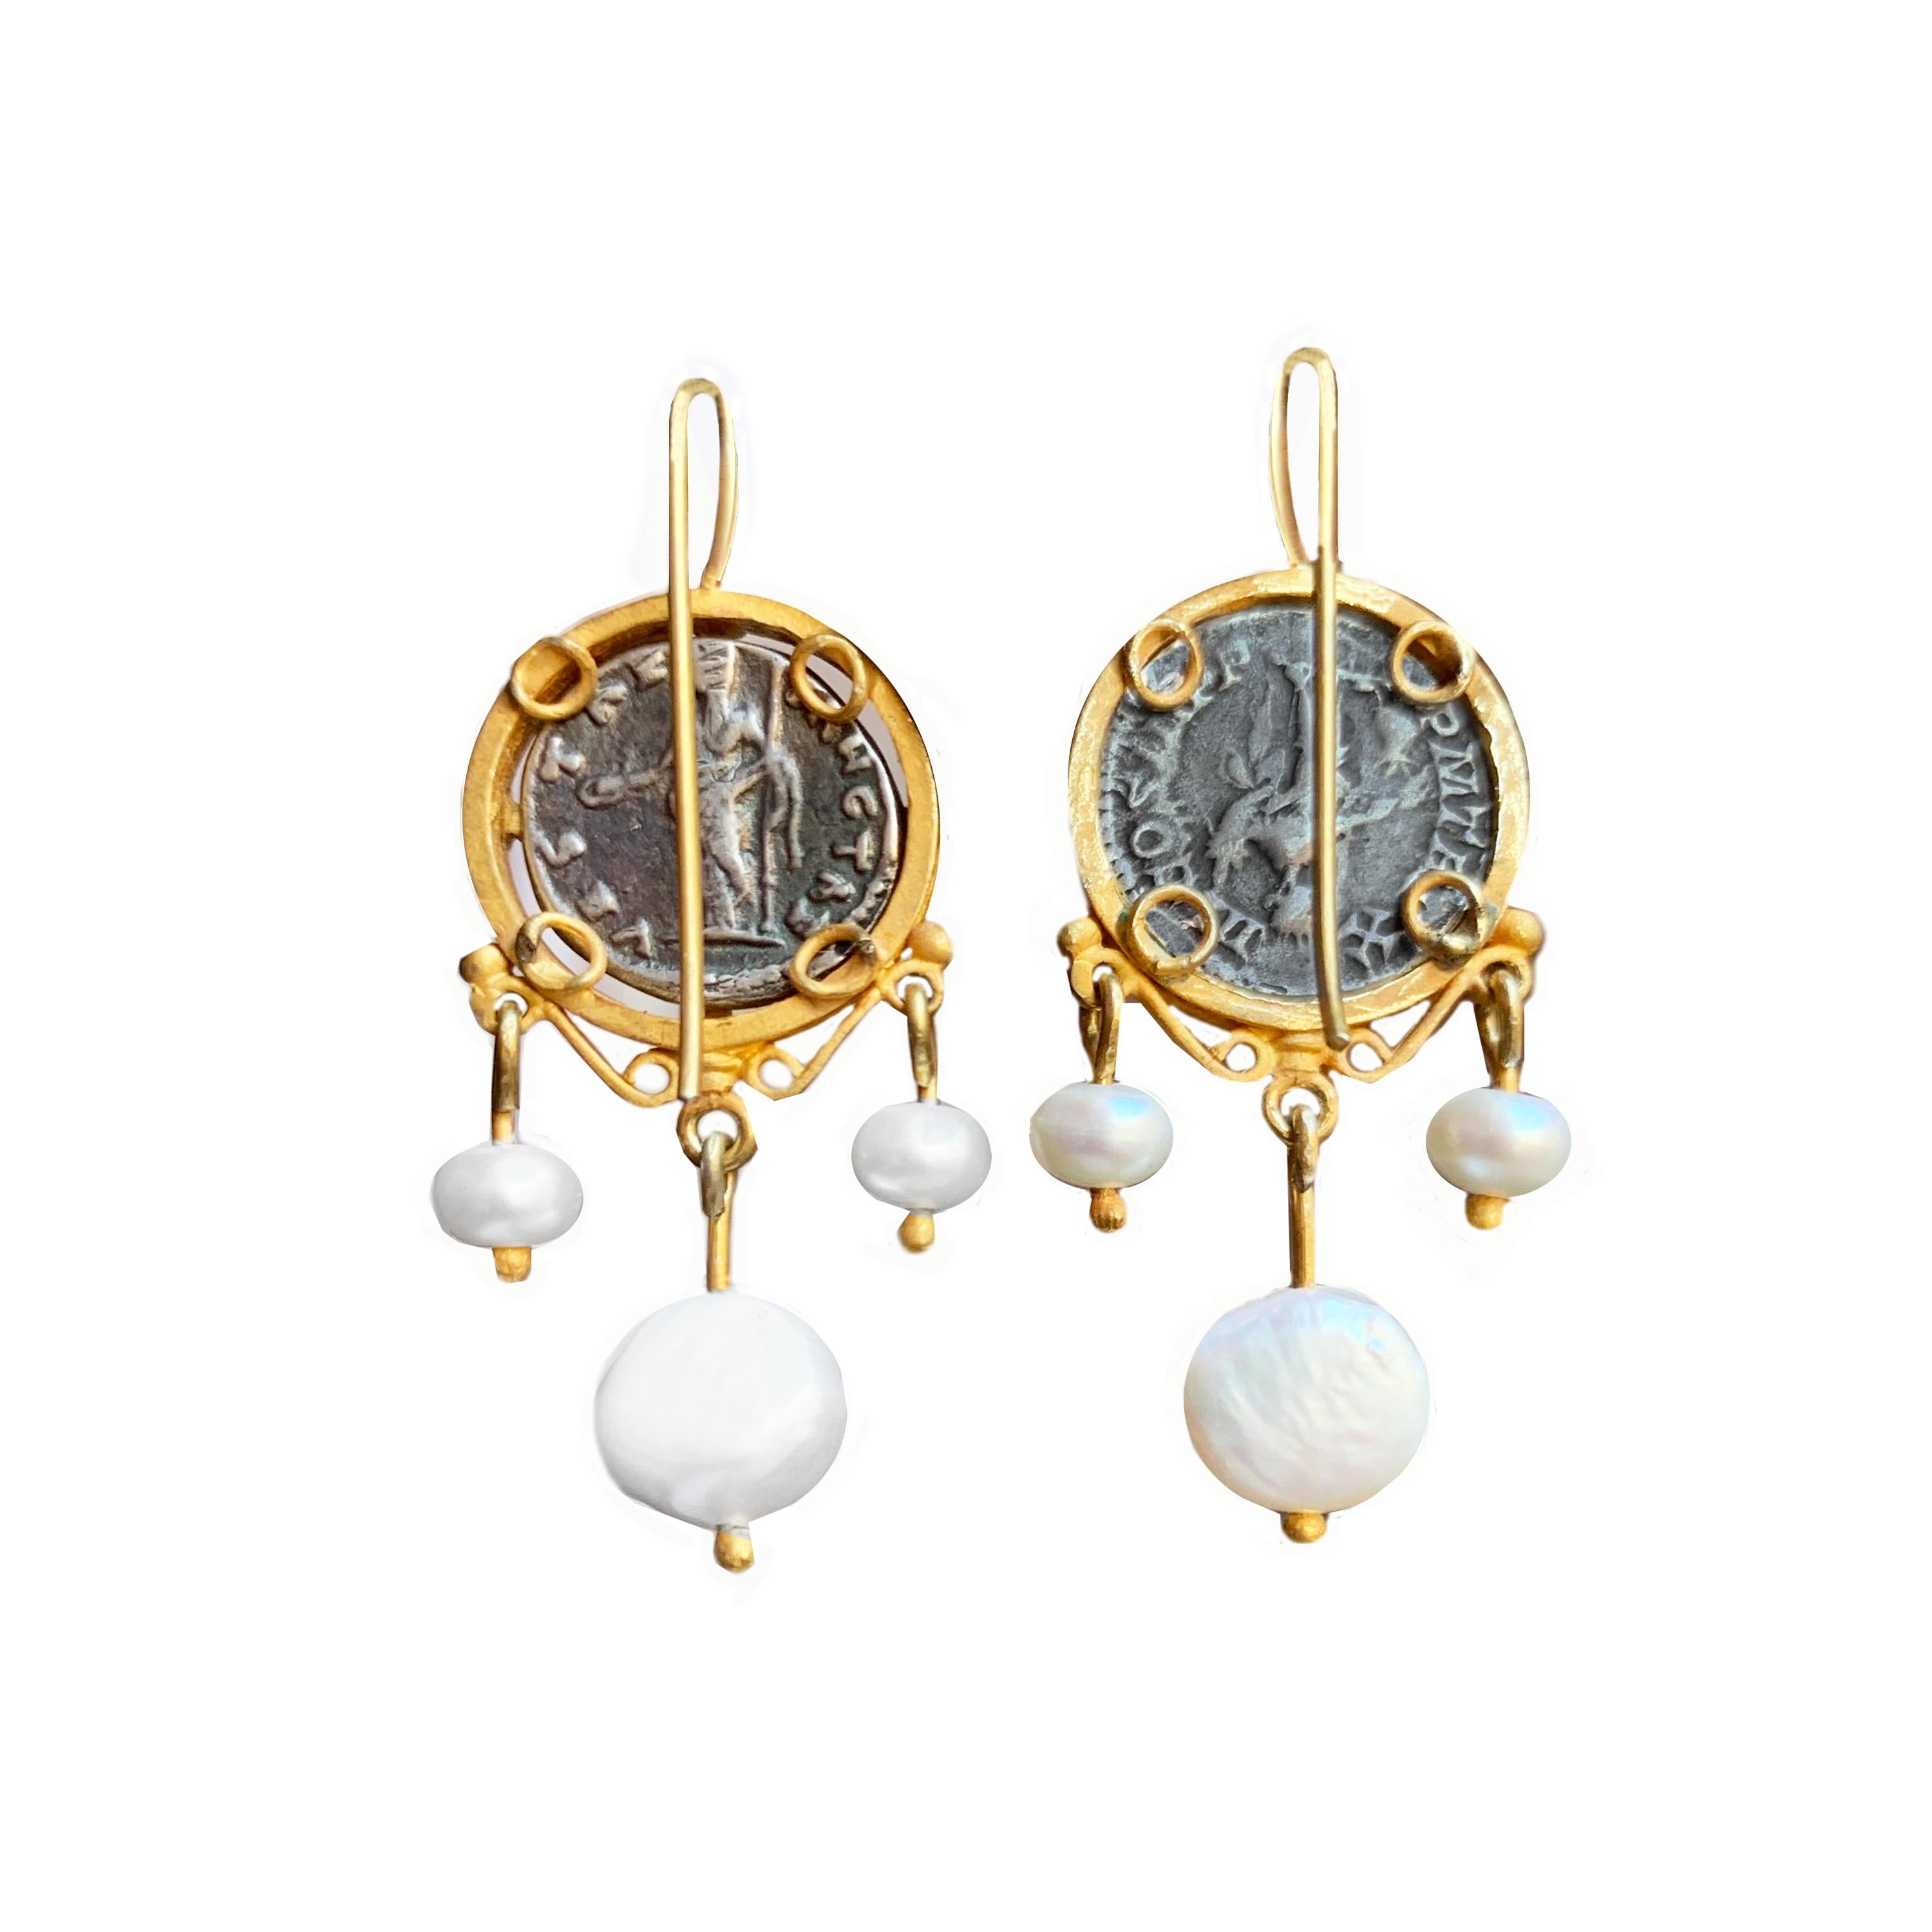 In these fascinating earrings are mounted two authentic Roman coins, which represent the Emperor Septimius Severus and his wife Julia Domna. The design, typically from the Roman era, is even more interesting due to the presence of 6 beautiful